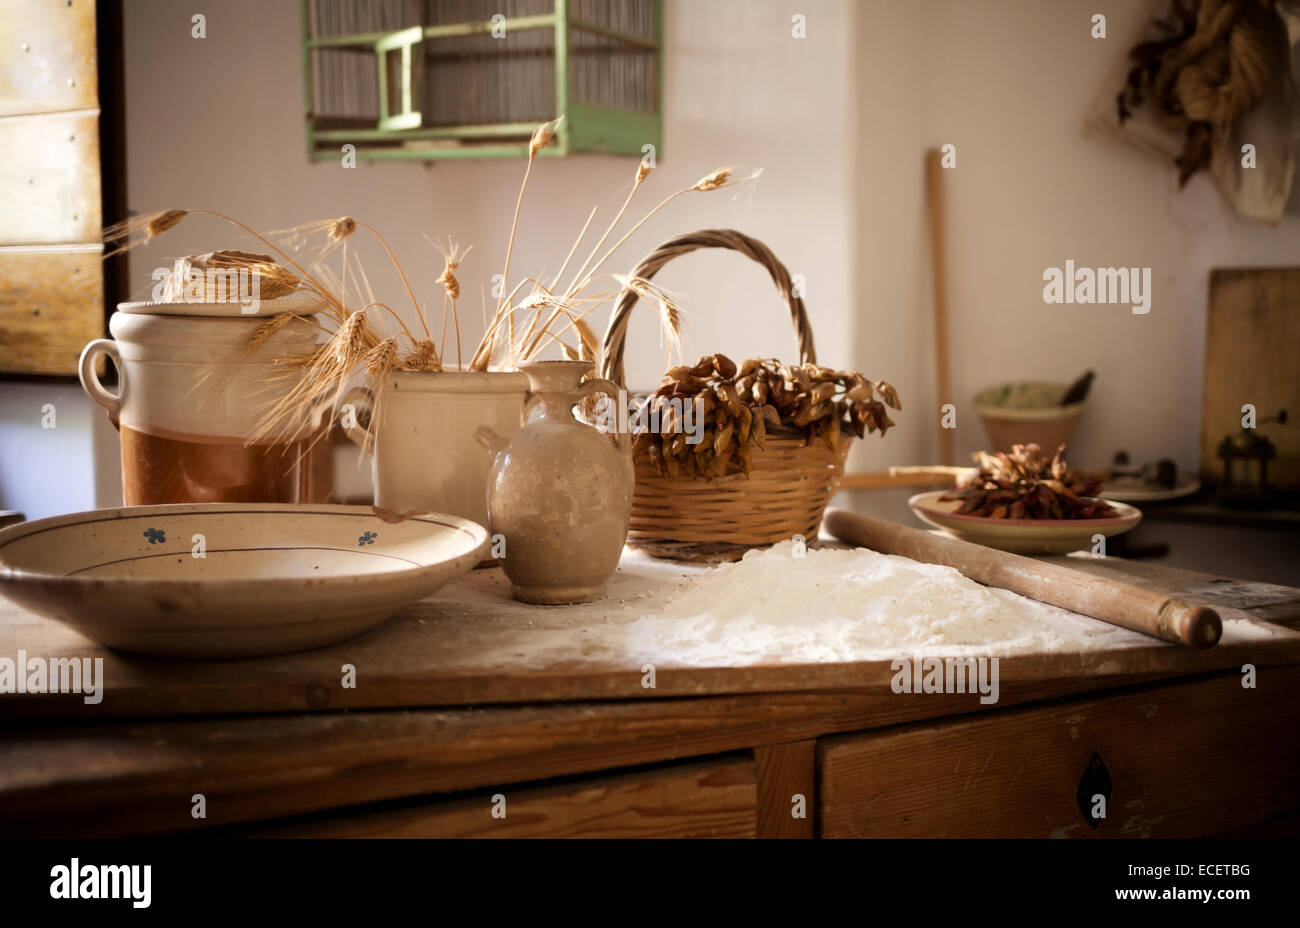 Table with ingredients and kitchen tools, vintage image. Stock Photo